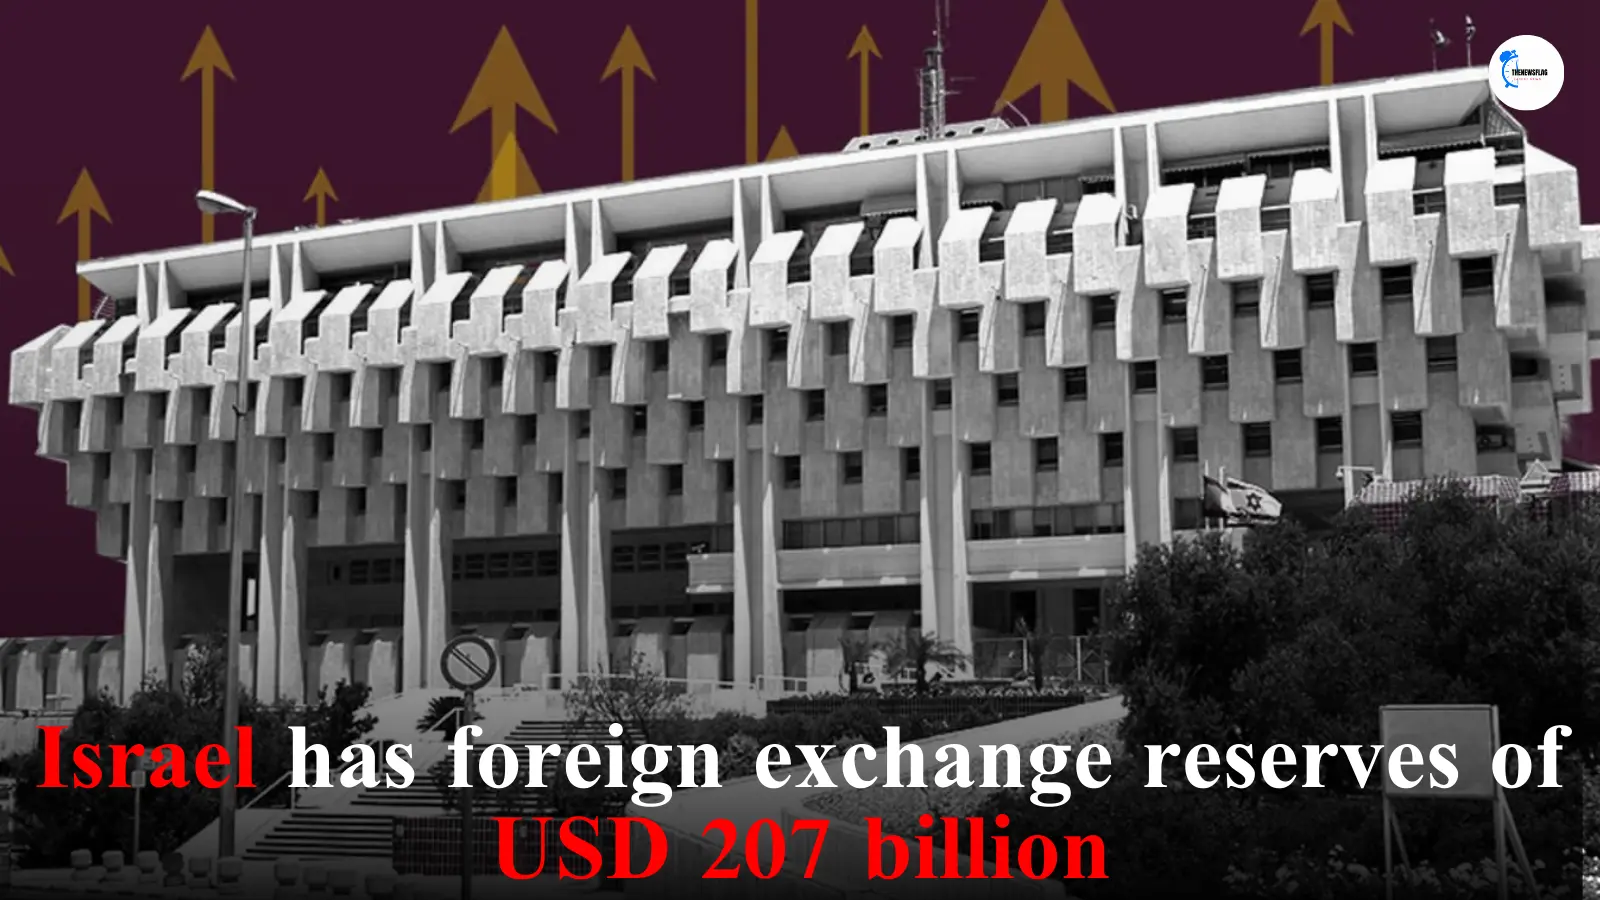 Israel has foreign exchange reserves of USD 207 billion